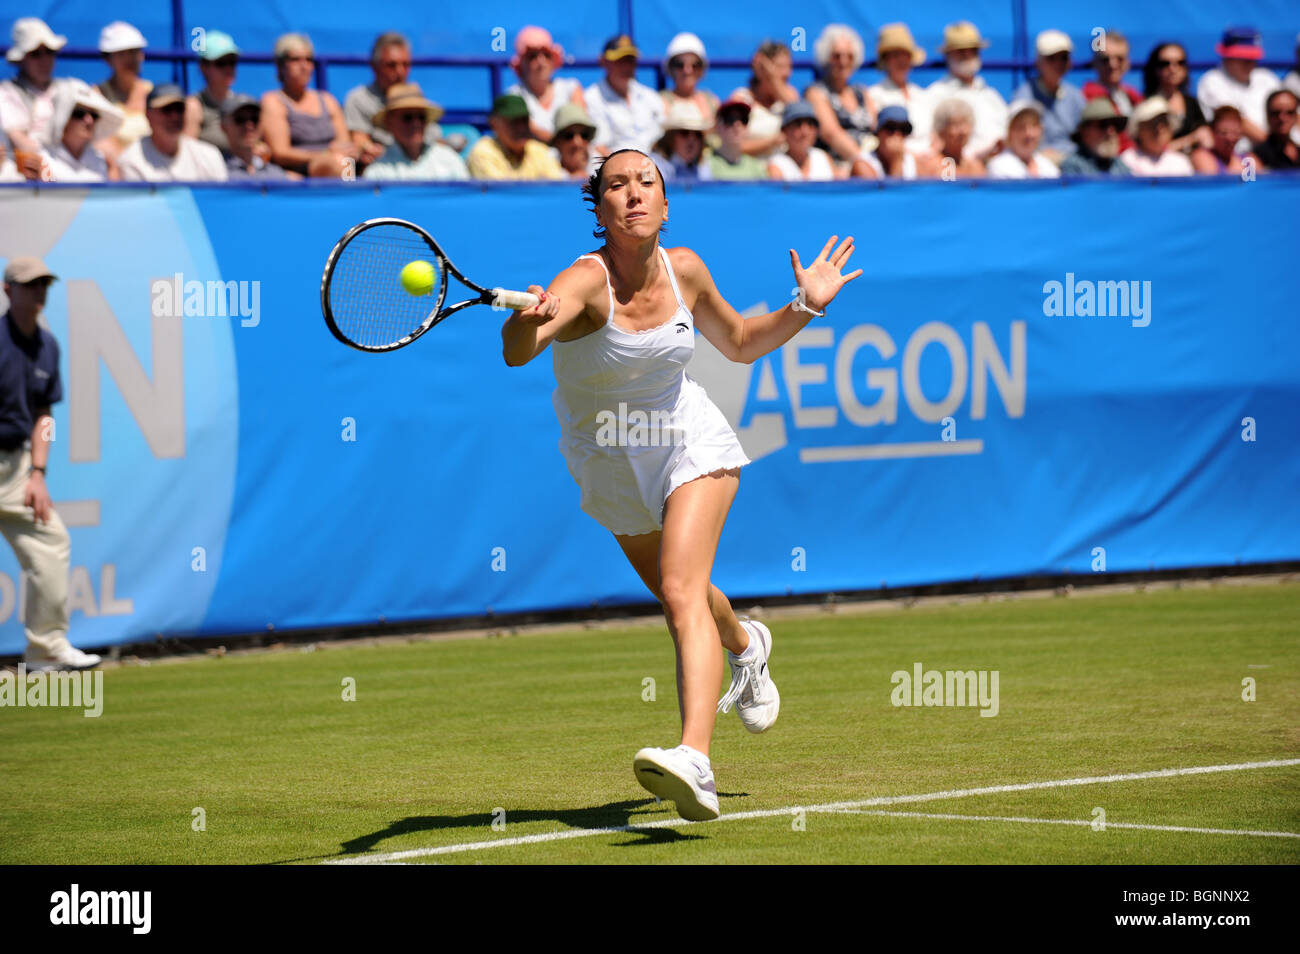 Jelena Jankovic in action at the Aegon International 2009 Tennis Championships at Devonshire Park Eastbourne Stock Photo